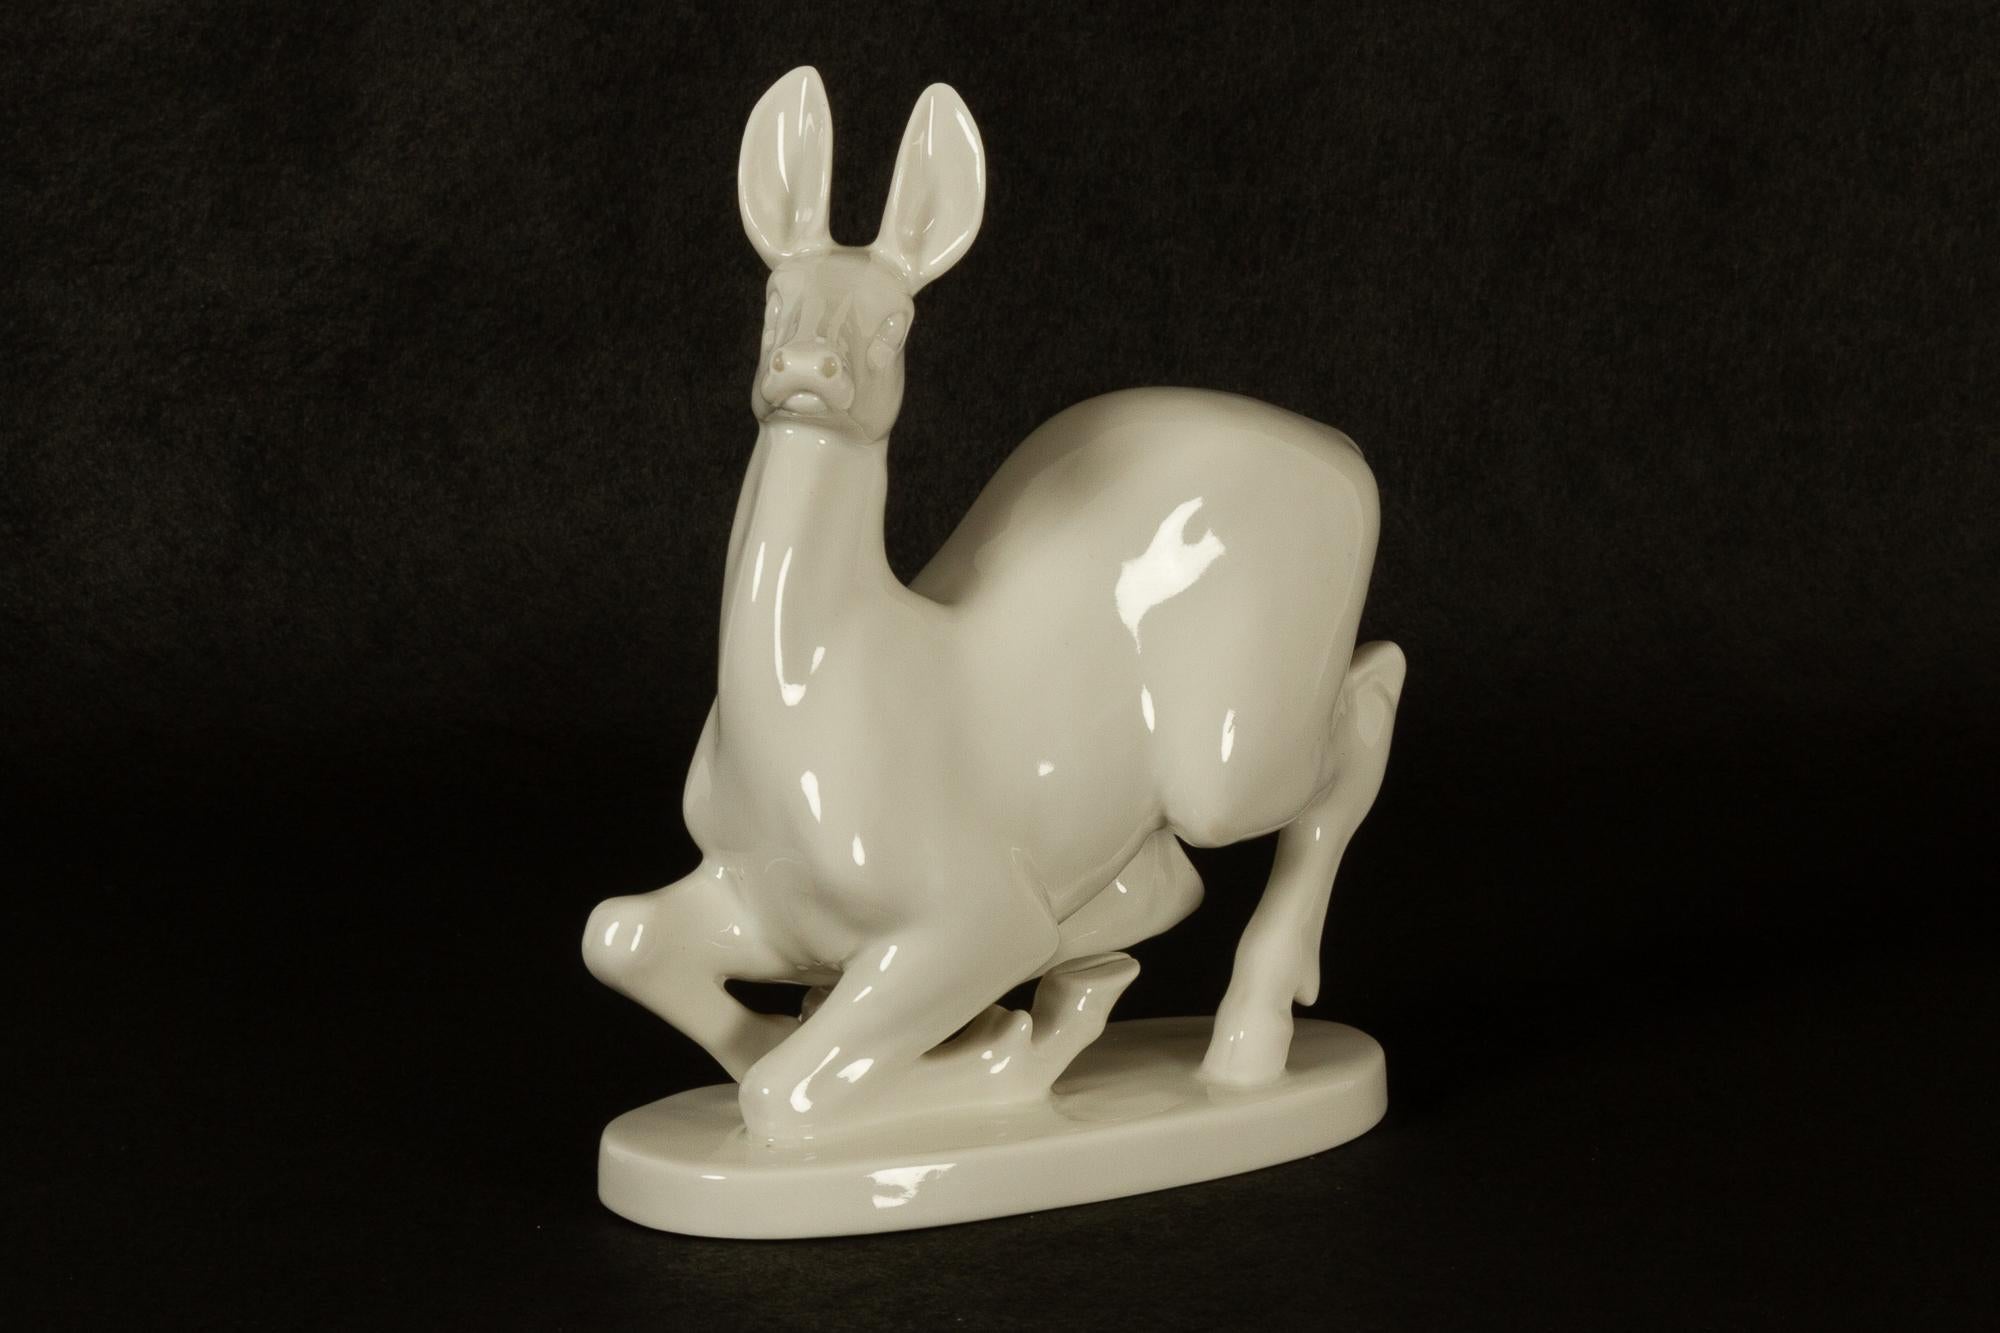 Vintage porcelain deer figurine by Lomonosov.
White glazed porcelain figurine designed by Russian artist Lomonosov and made in St. Petersburg in the 1960s-1970s. Measures: Height 24 cm. USSR red stamp.
Very good condition. No chips or cracks.